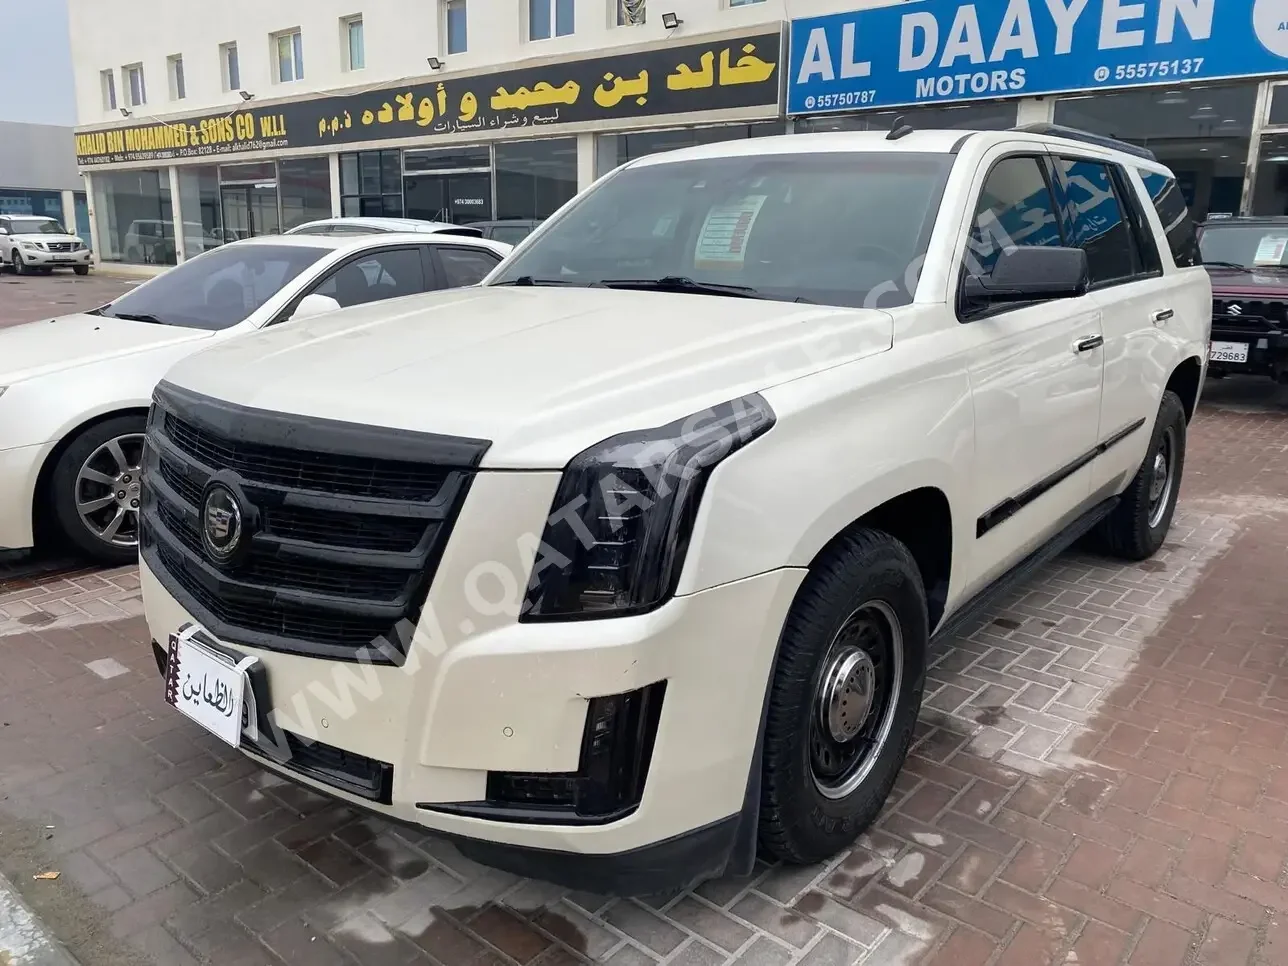 Cadillac  Escalade  2015  Automatic  279,000 Km  8 Cylinder  Four Wheel Drive (4WD)  SUV  White